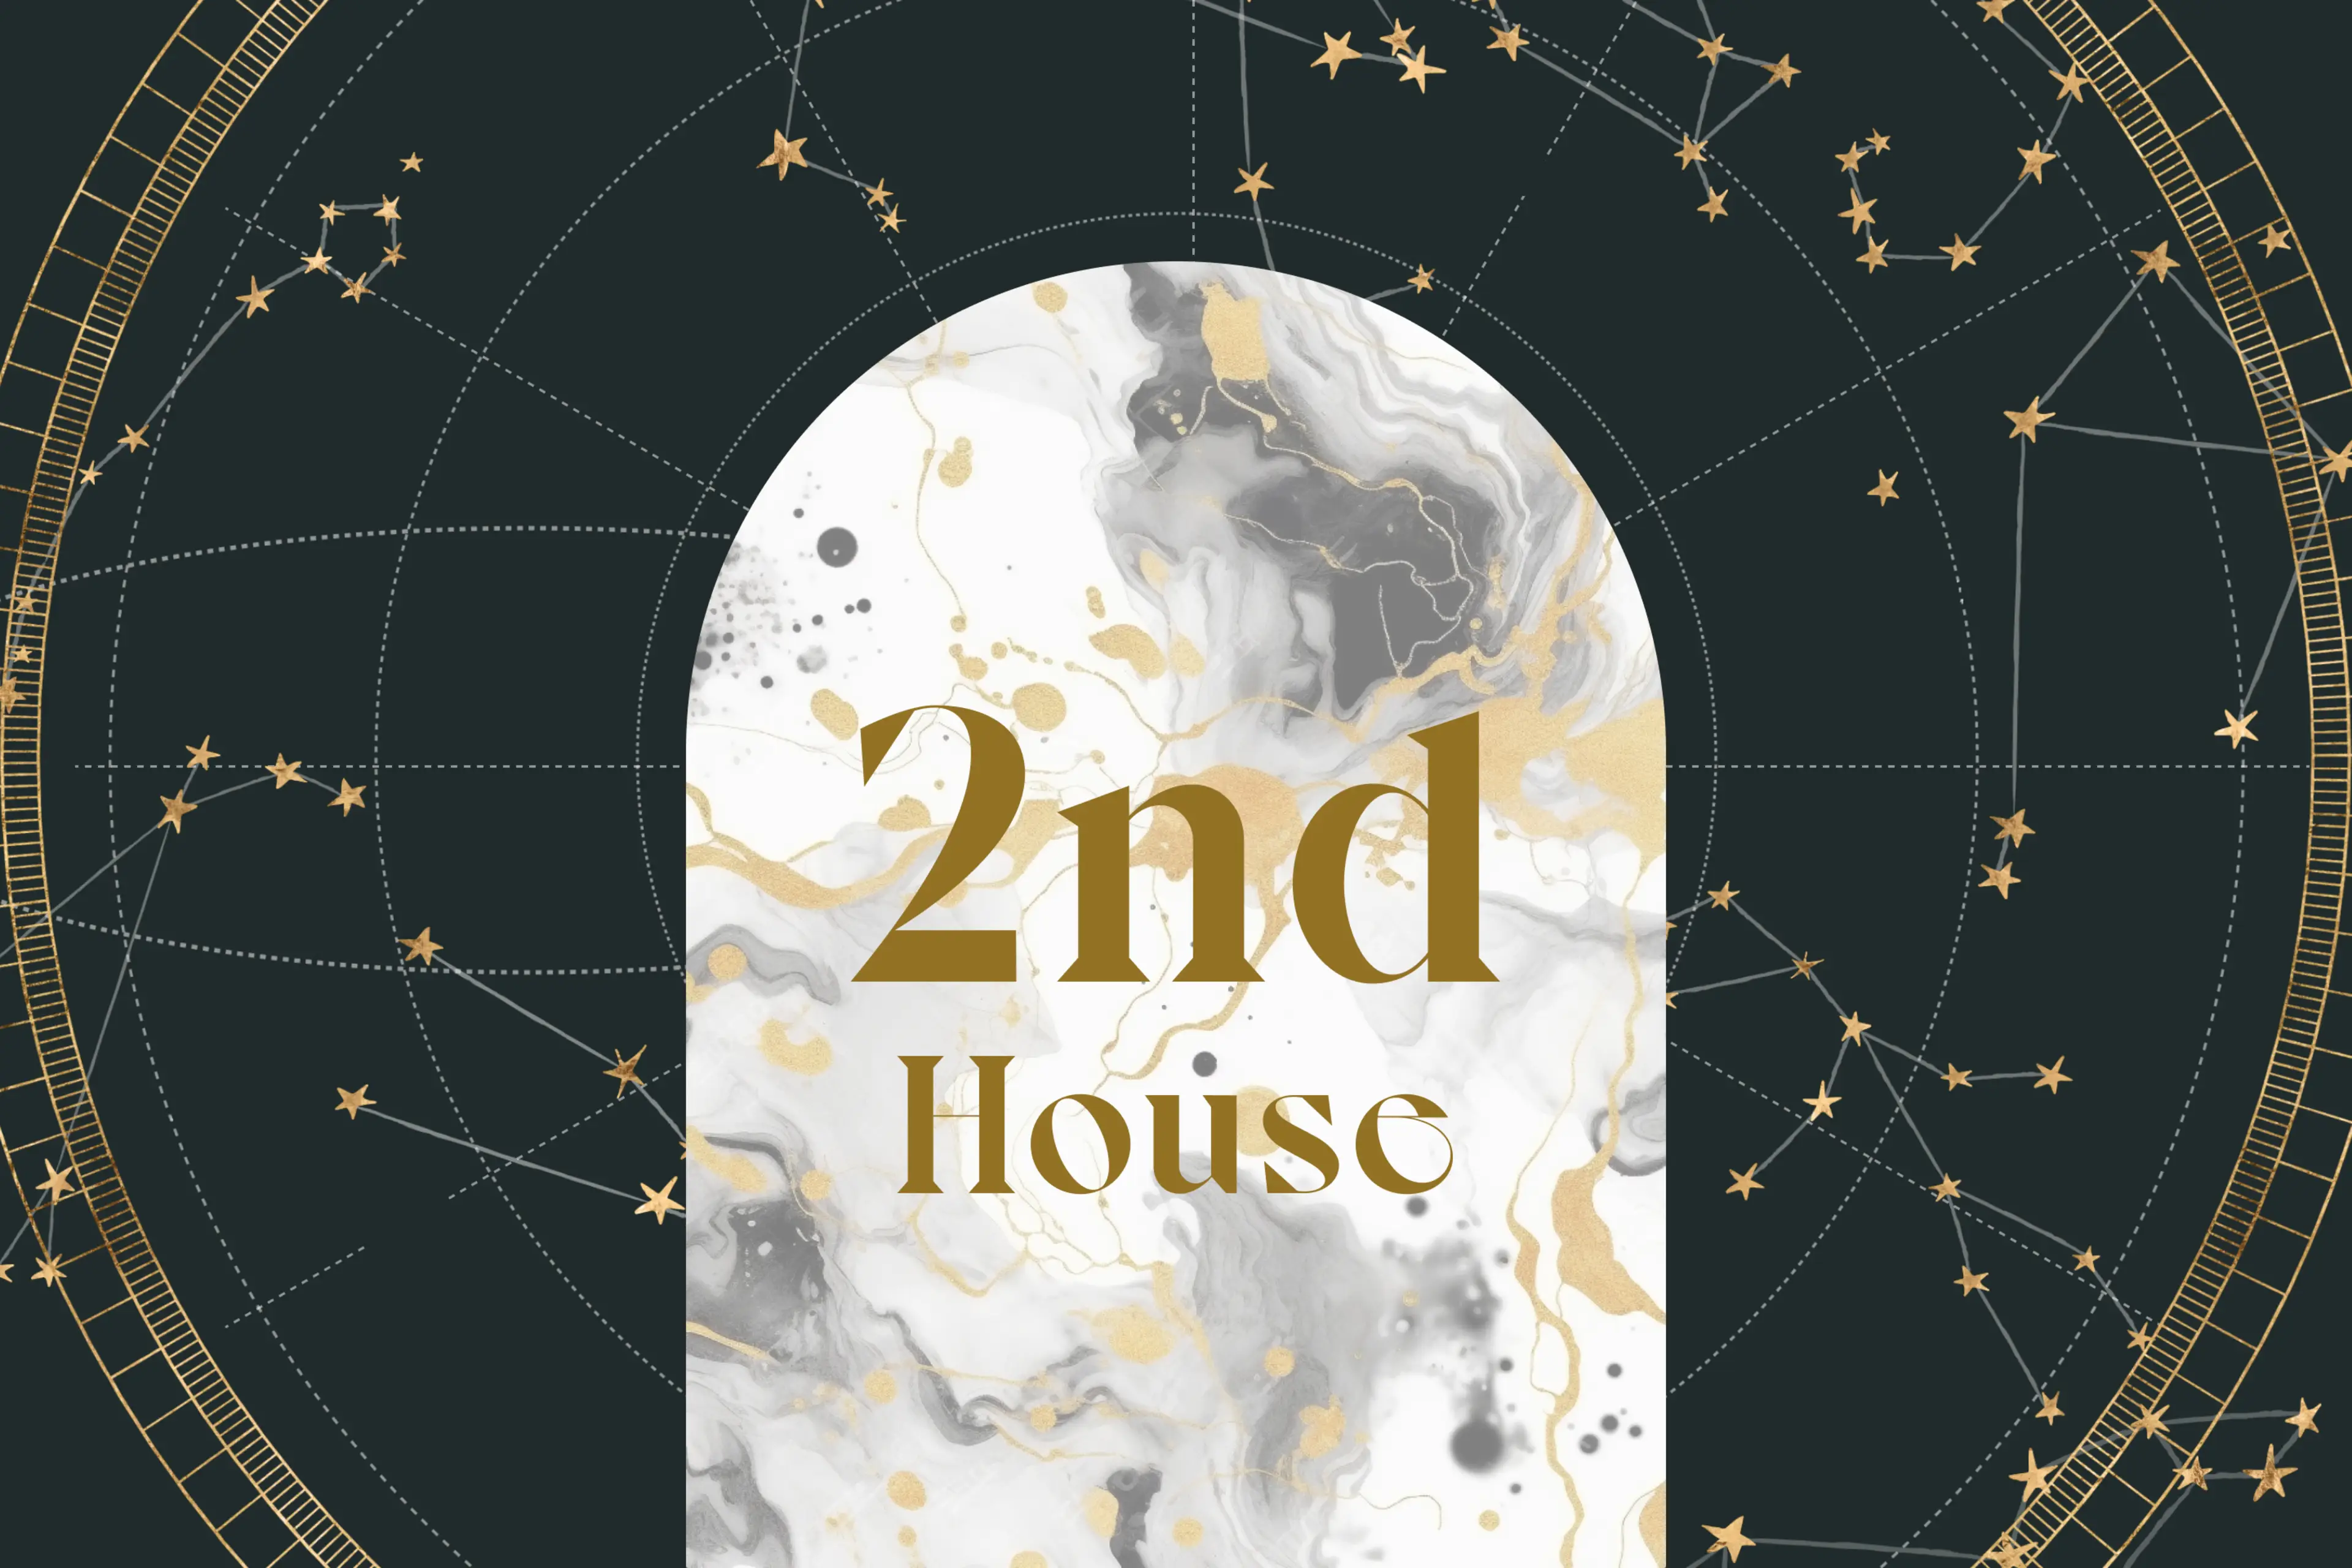 Second House in Astrology